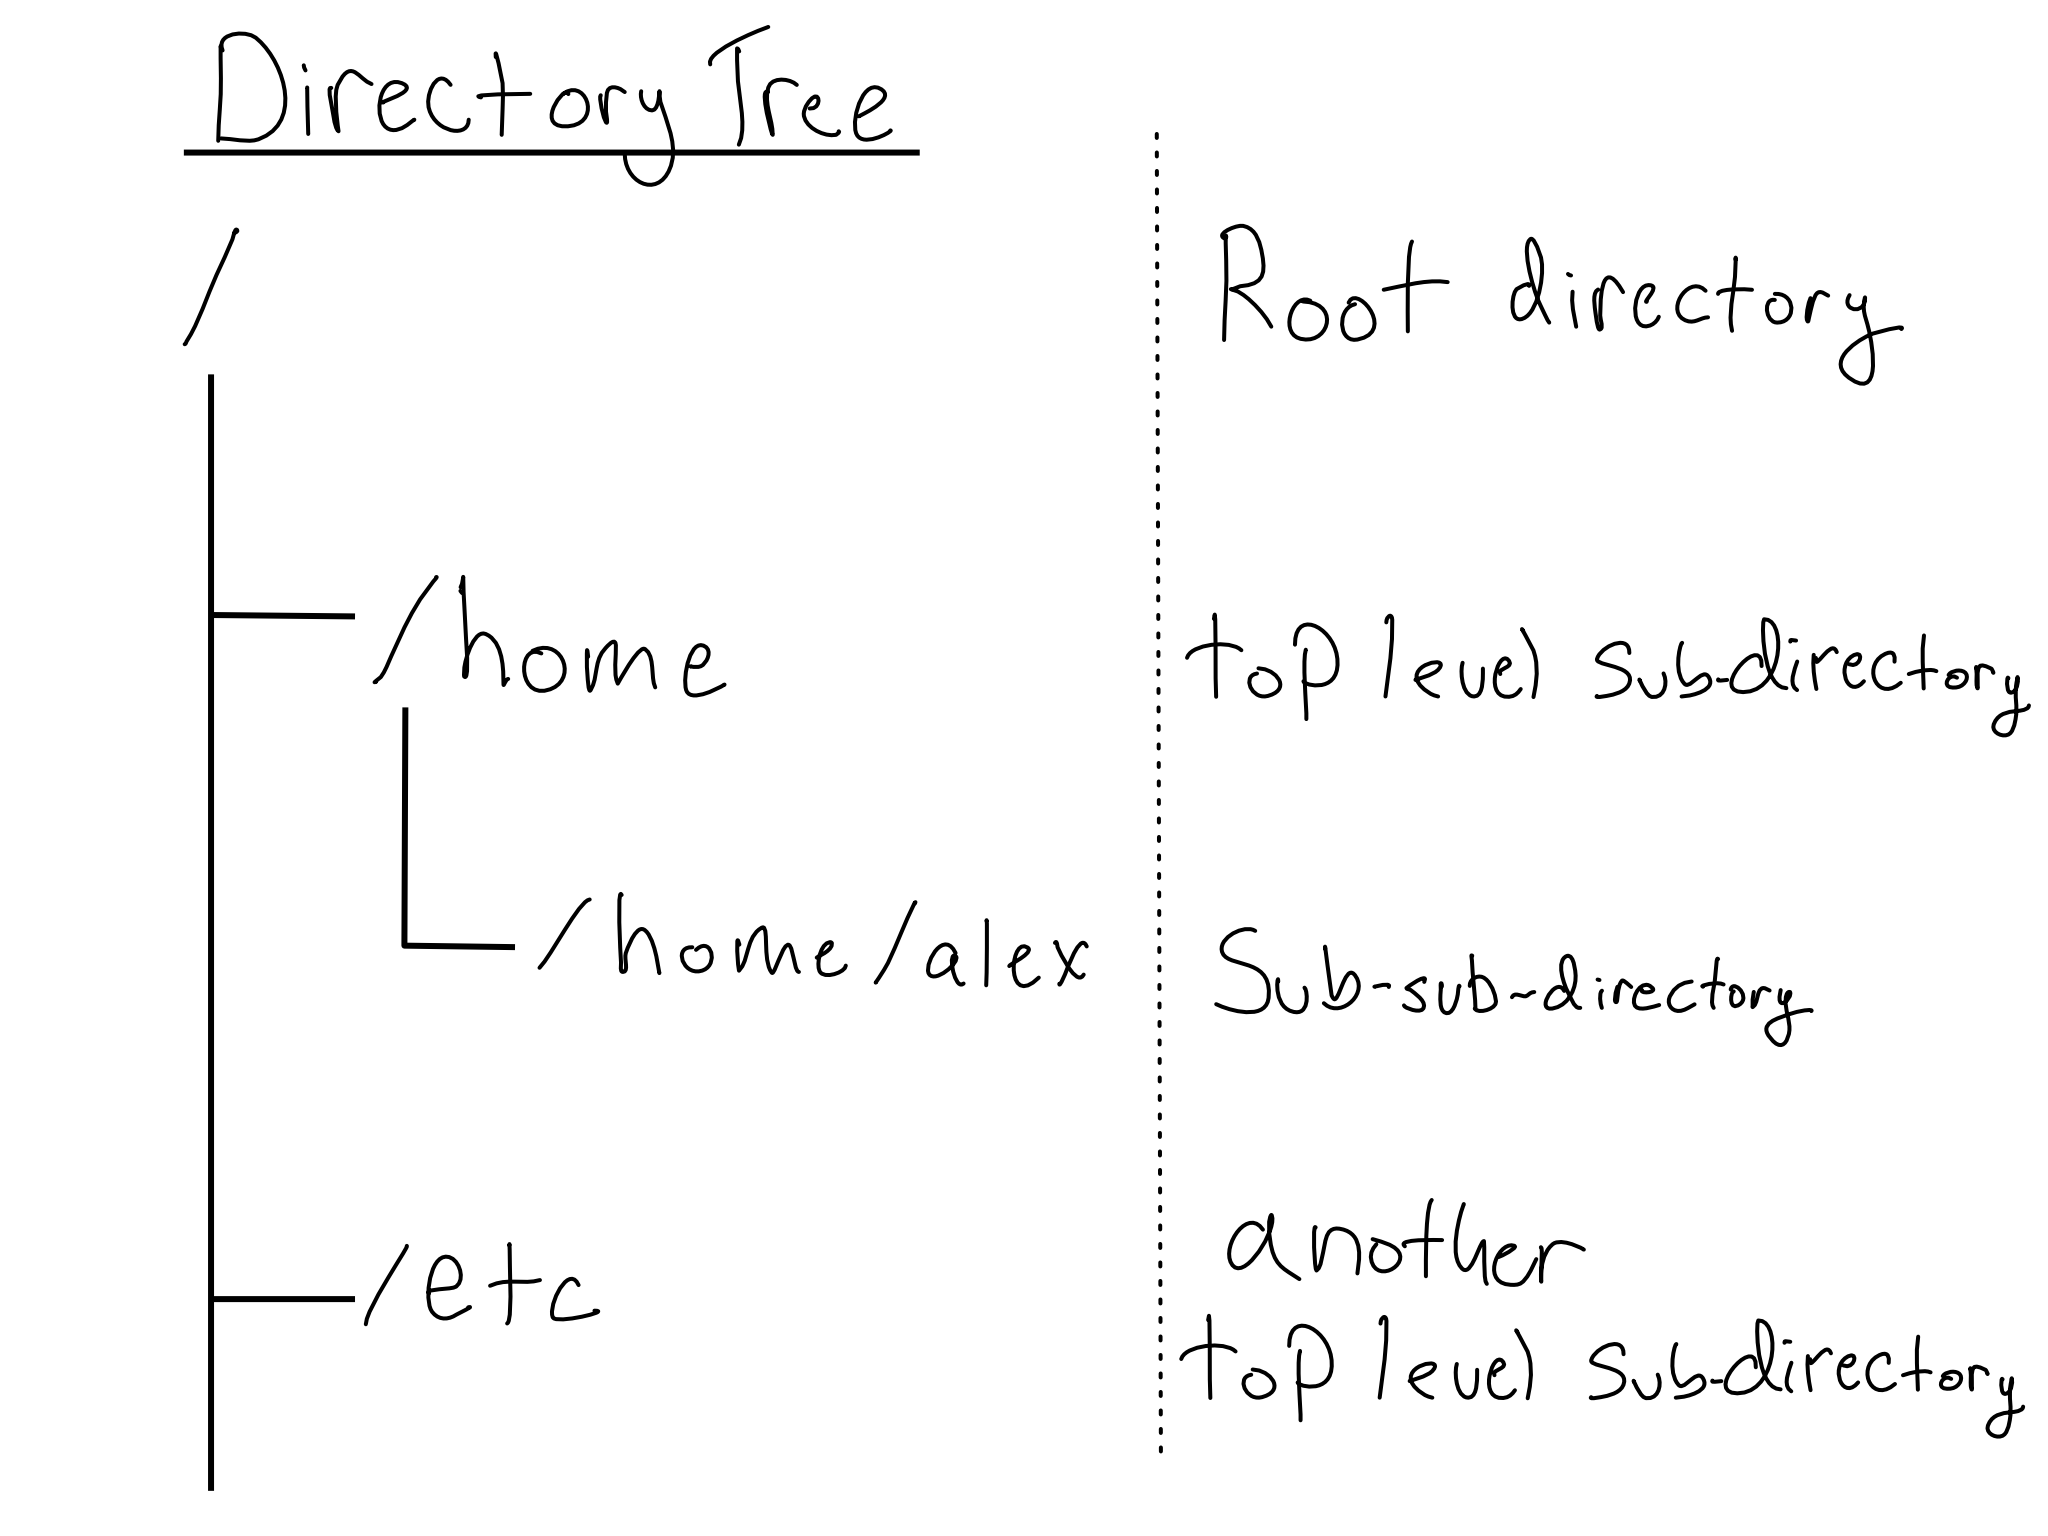 A tree of directories. / is the root, /home is a sub directory, /home/alex is a sub-sub-directory, and /etc is another sub-directory.